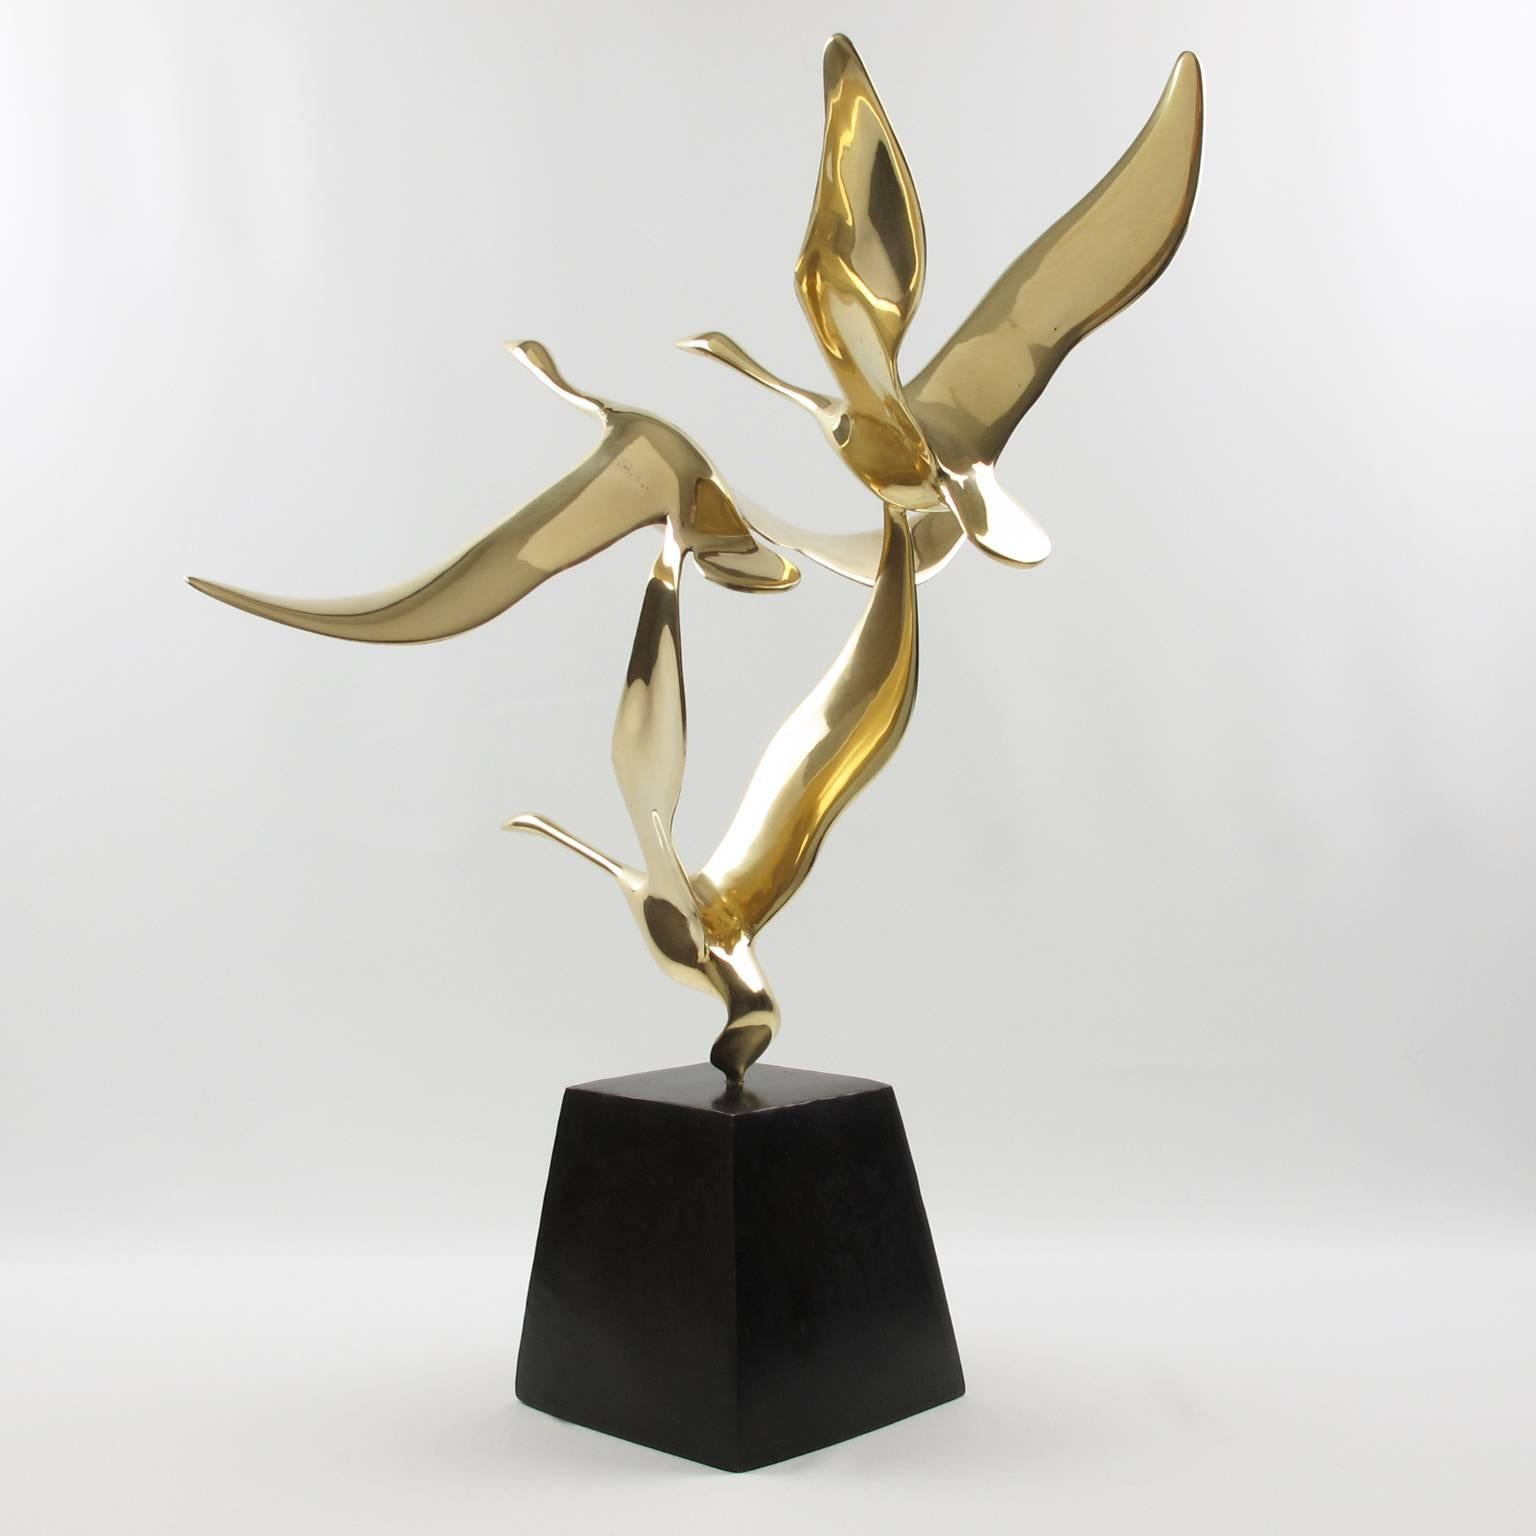 Elegant Mid-Century Modern polished brass sculpture featuring flying wild birds (very likely goose). Heavy geometric bronze base with original brown patina. The brass flying birds come off the bronze base (check picture). The modernist sculpture has